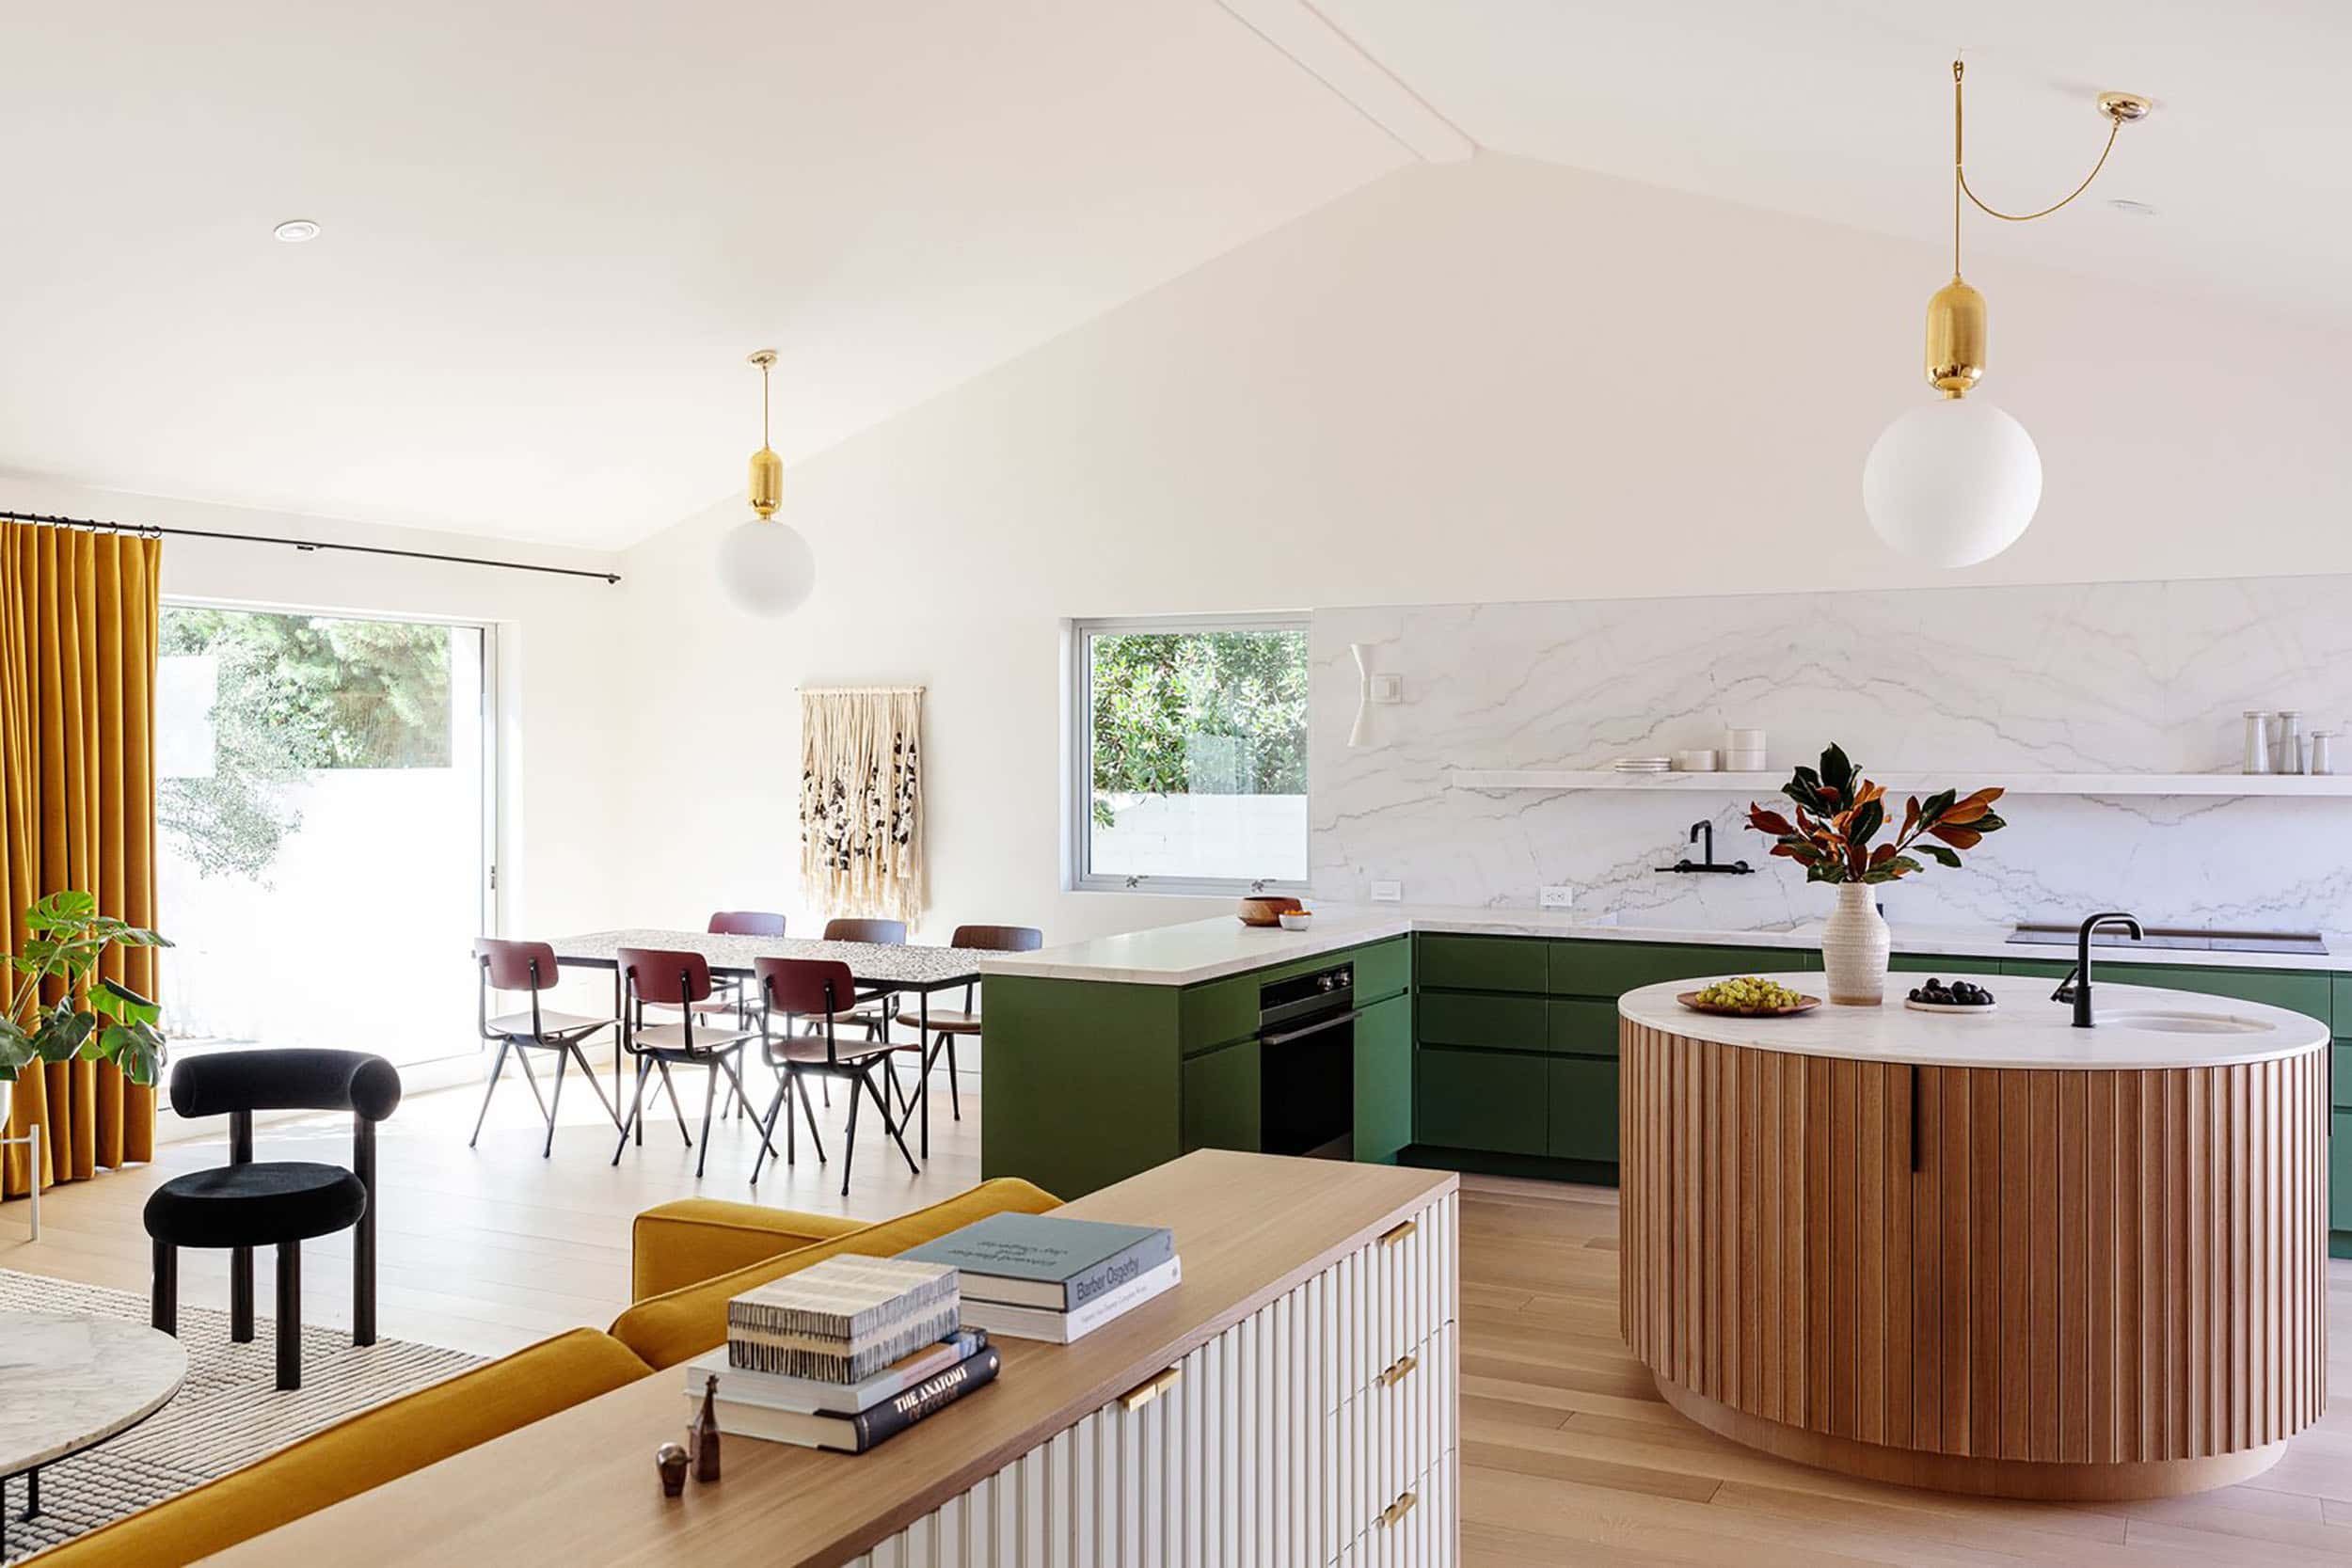 Kitchen Flooring Trends: How To Make A Statement In 2021